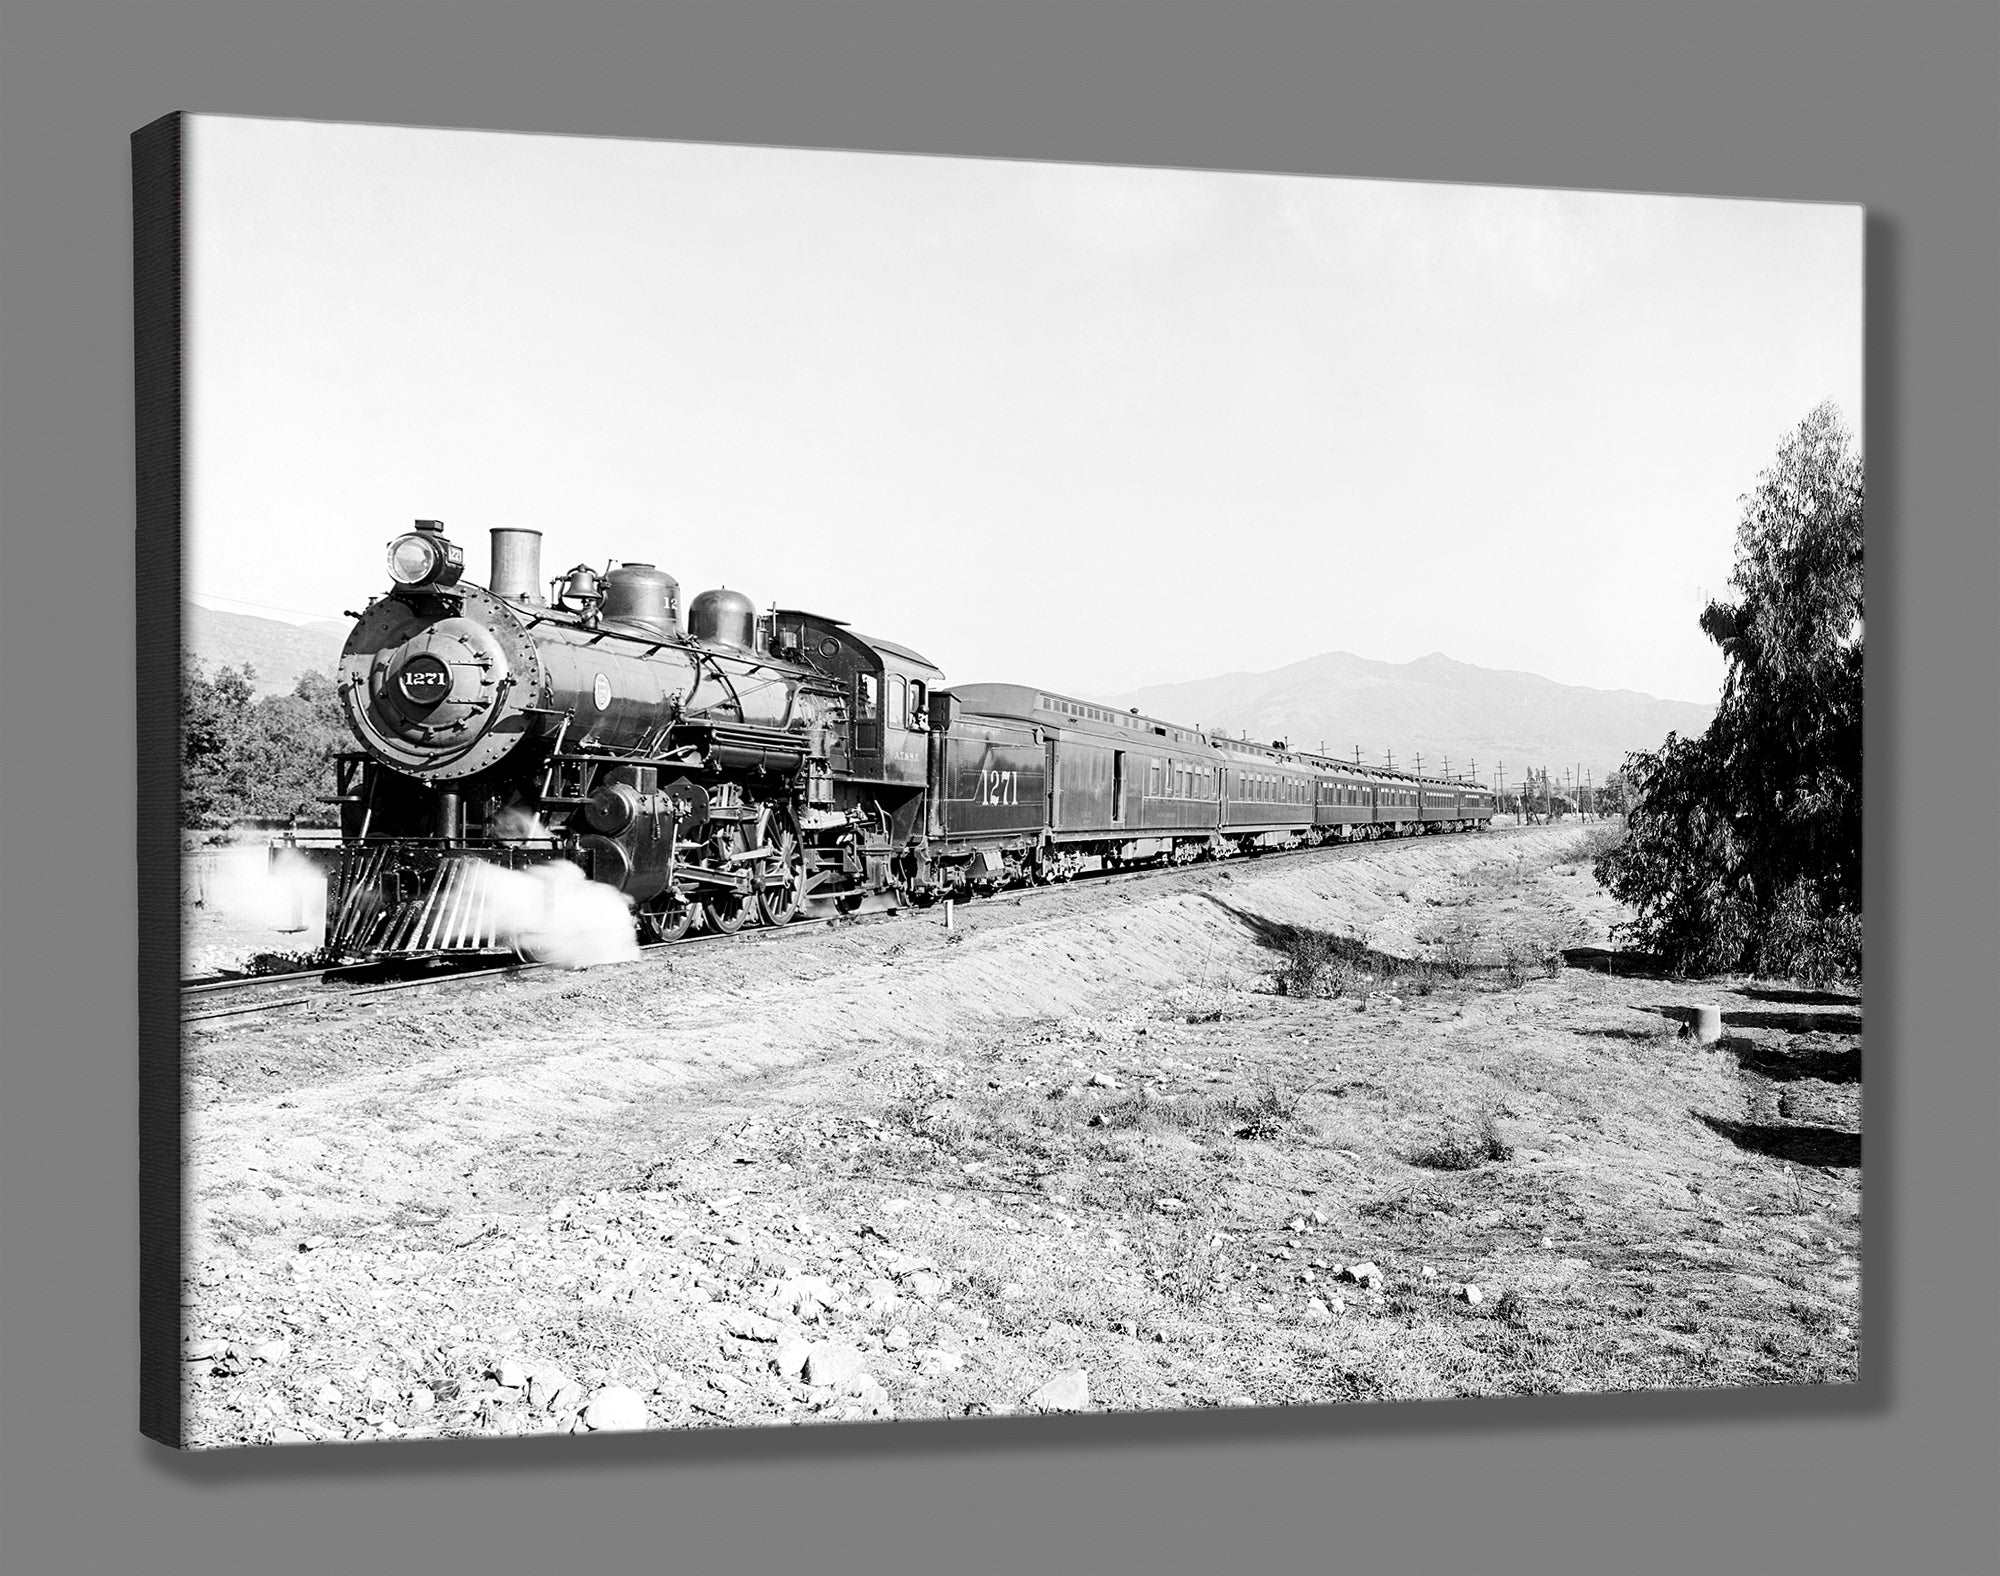 A canvas print reproduction of a vintage photograph of a Deluxe Overland Limited Train